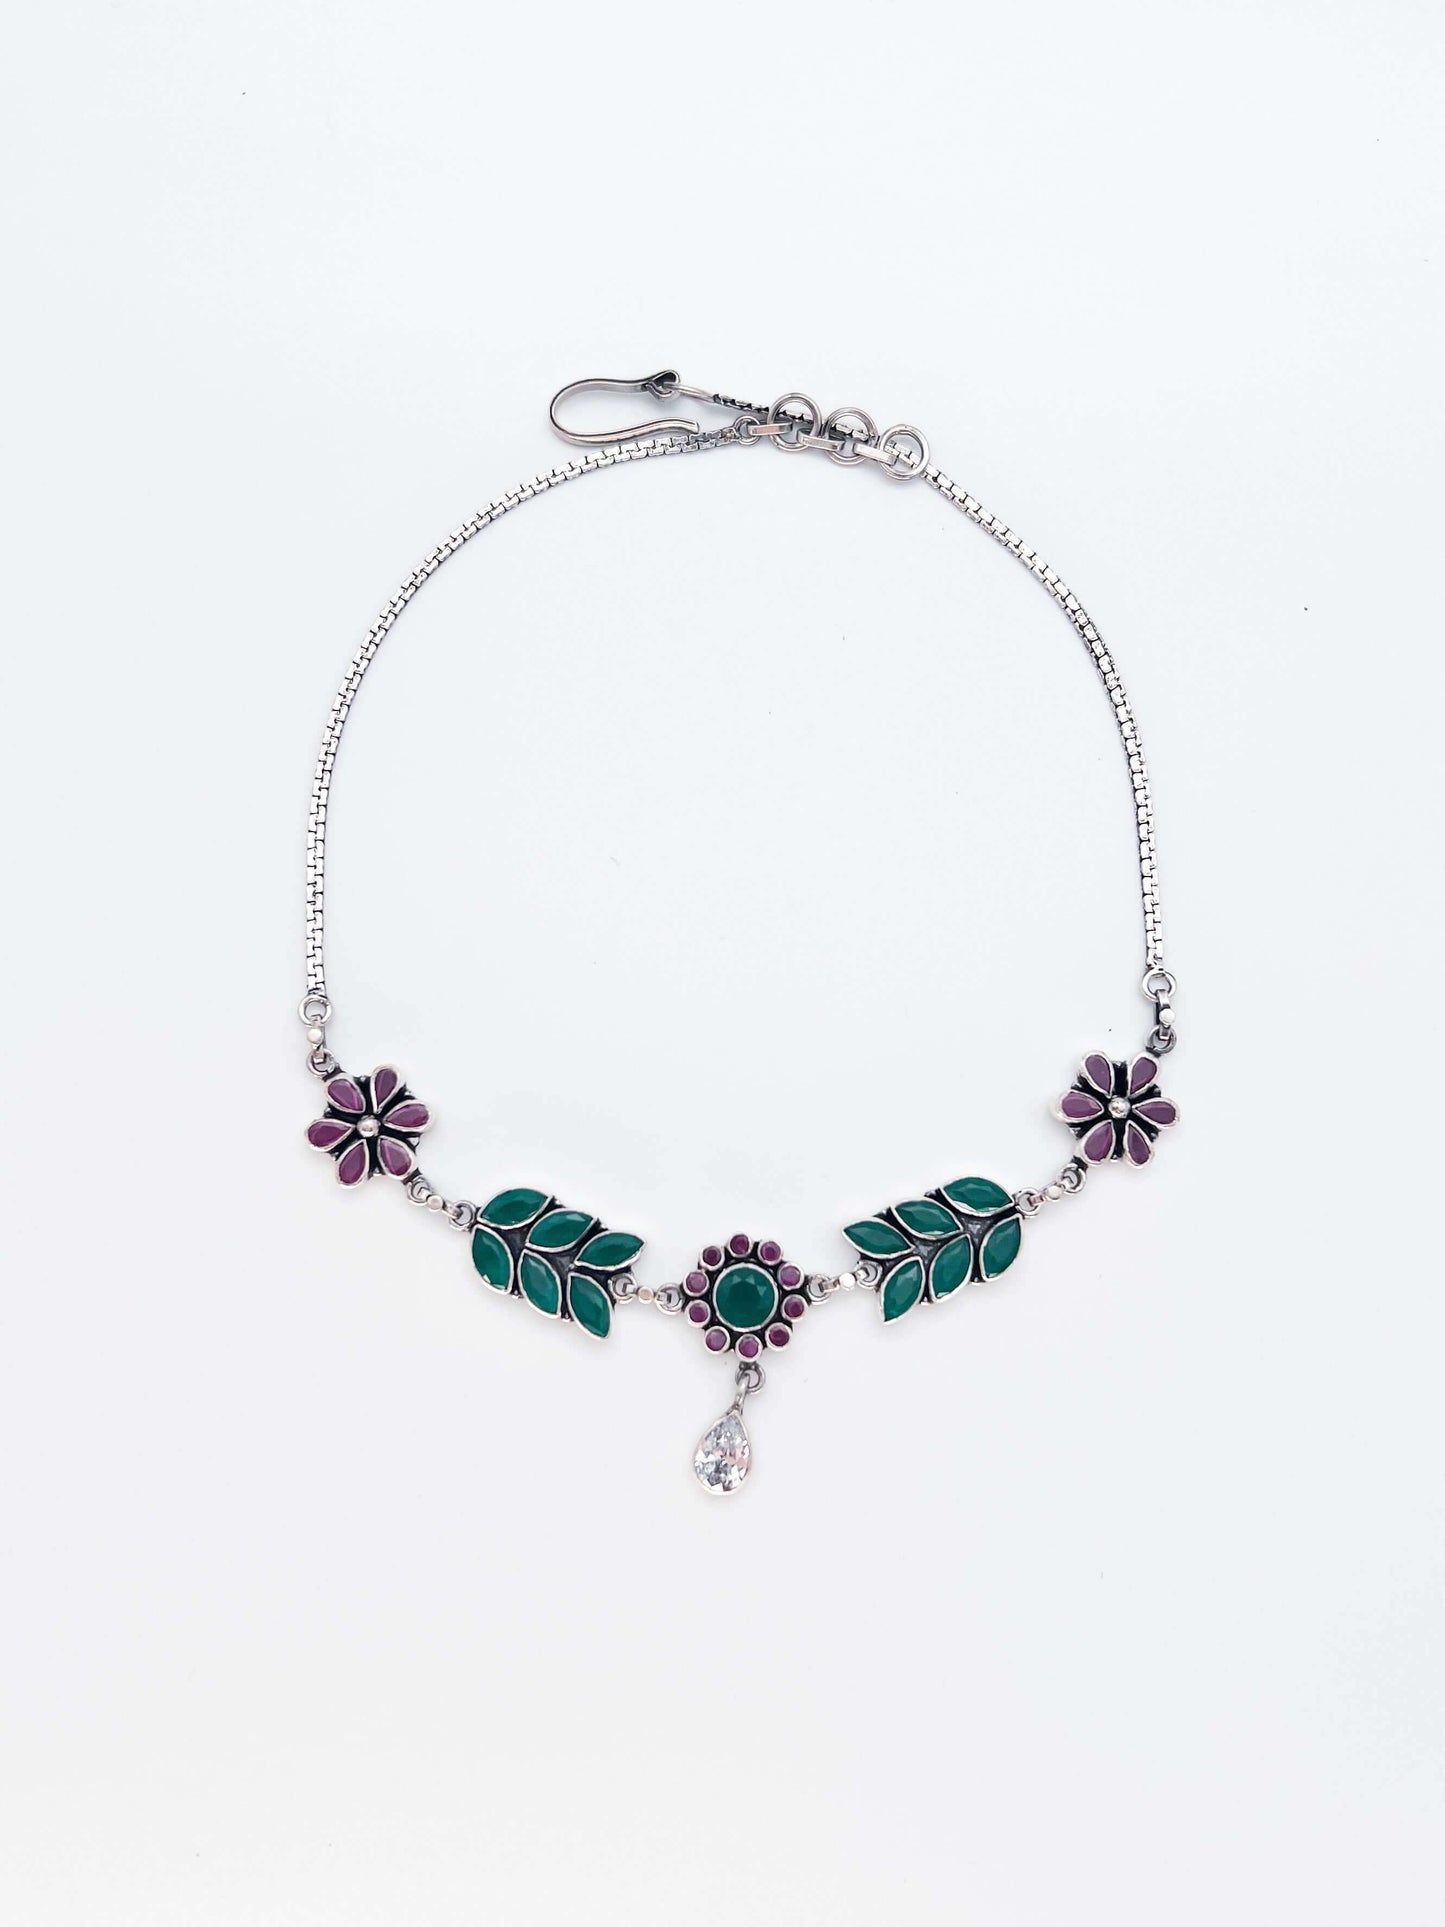 Bela silver necklace in green and ruby pink glass stone